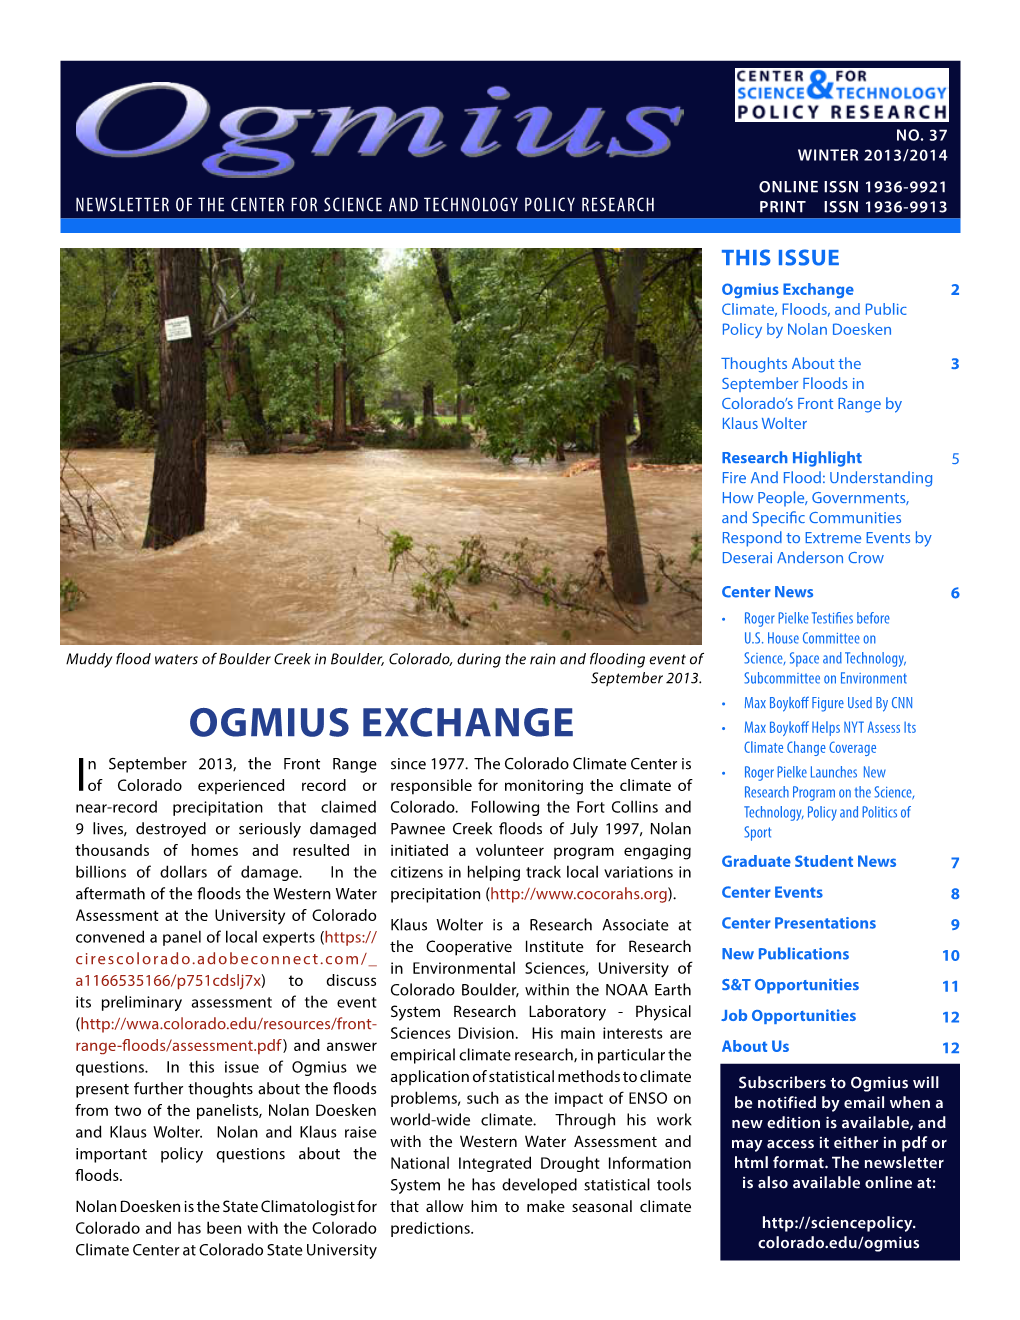 Ogmius Exchange 2 Climate, Floods, and Public Policy by Nolan Doesken